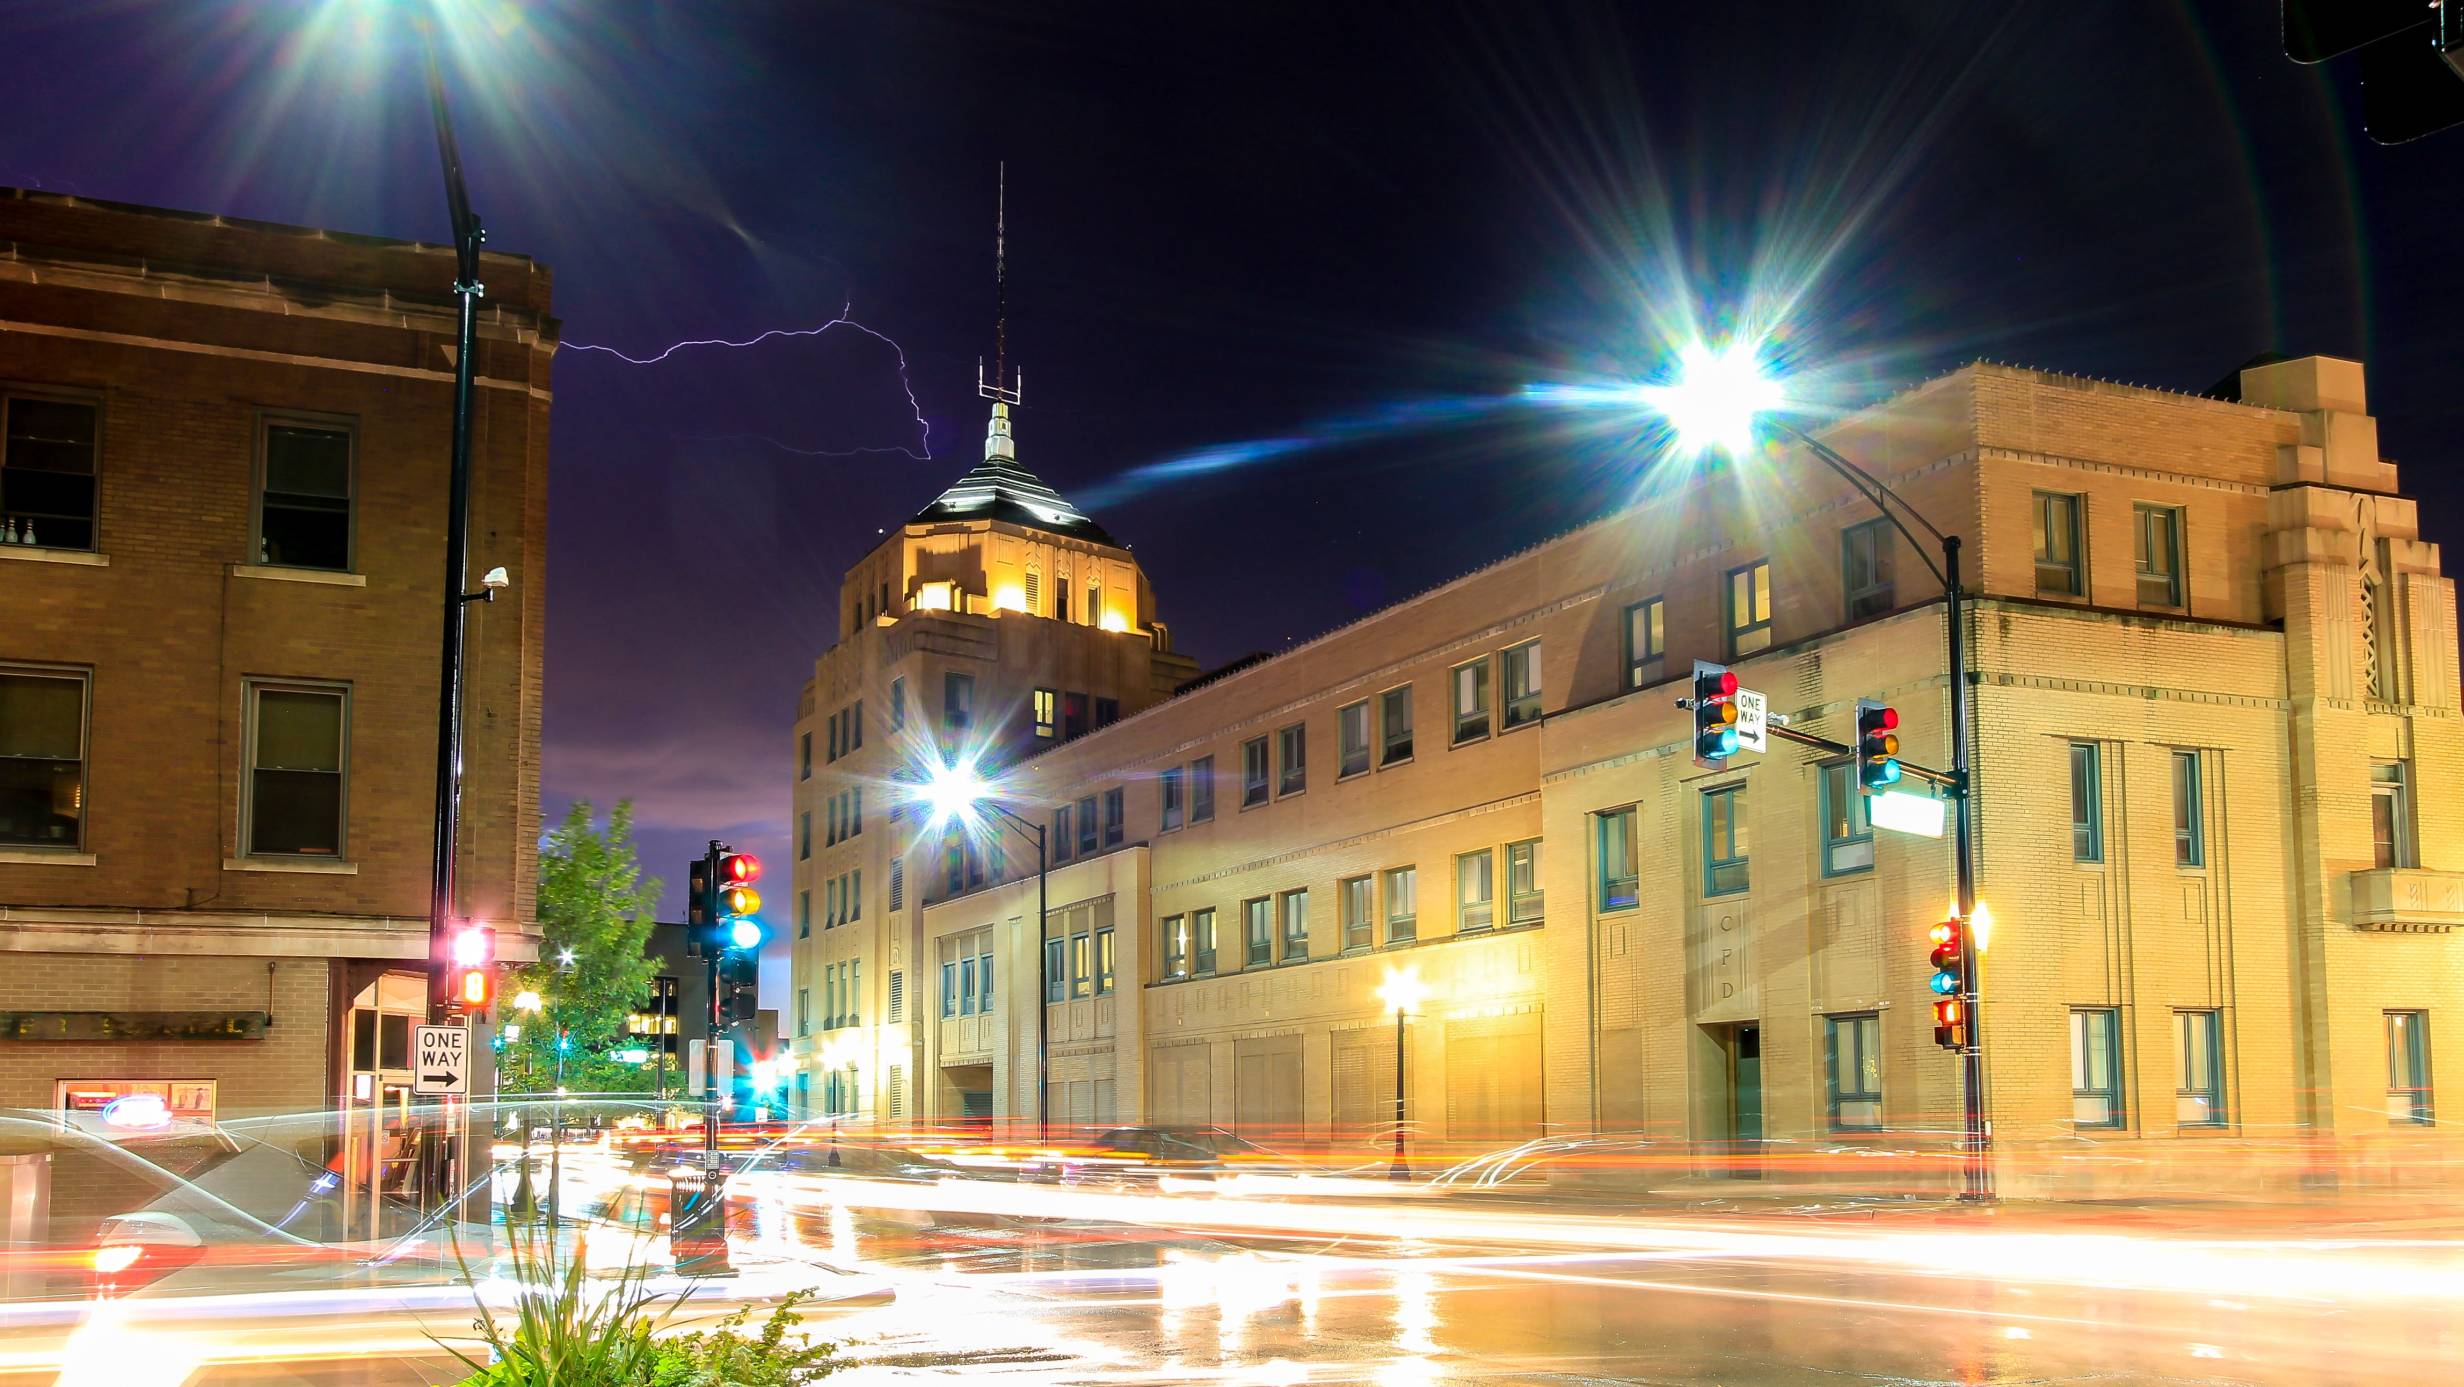 Lightning over the City of Champaign building